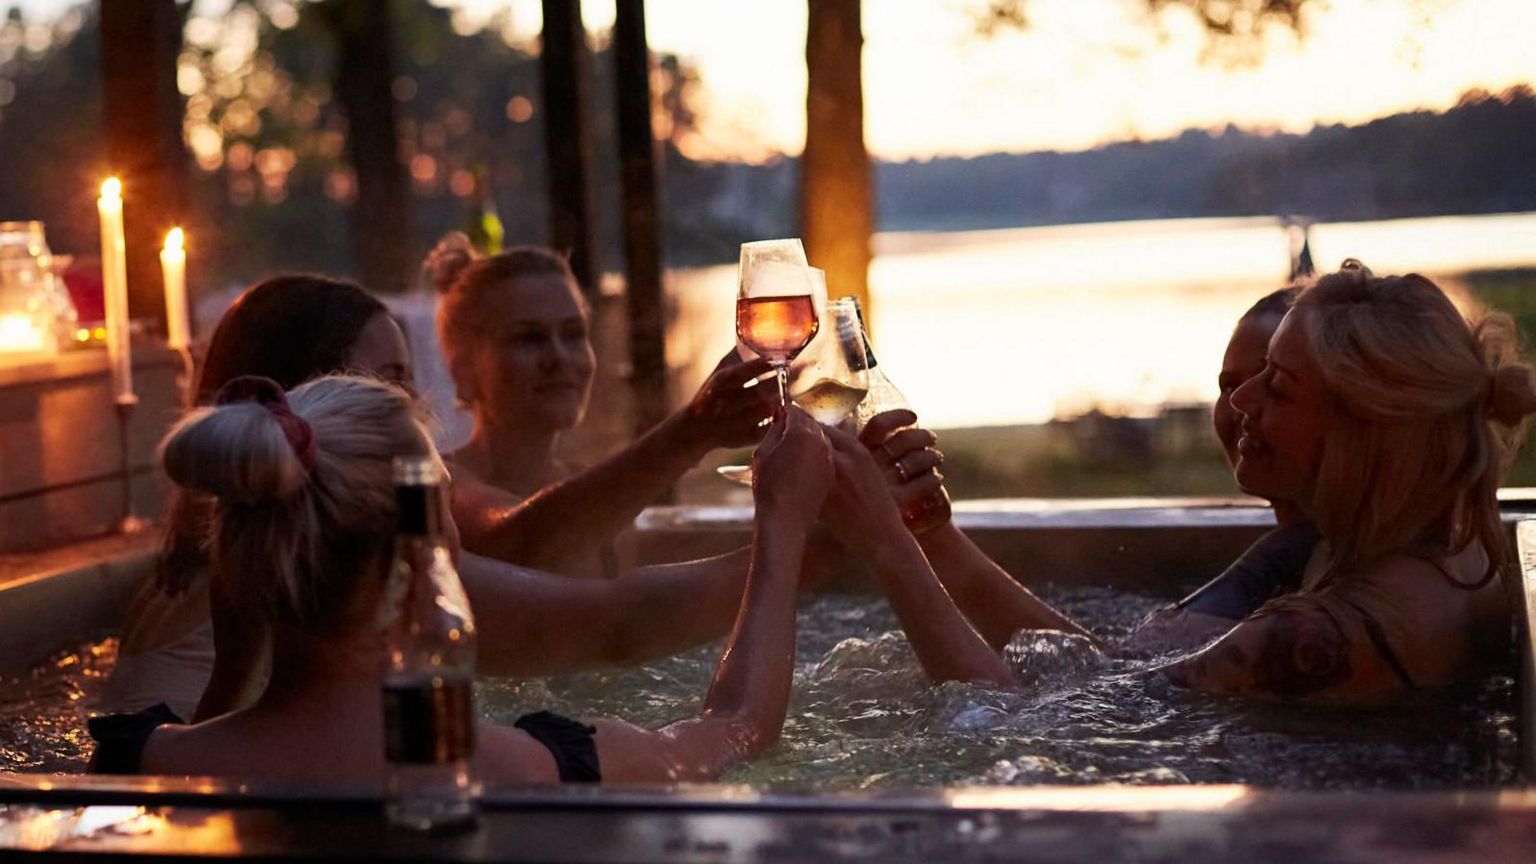 A group of women in a hot tub drinking wine